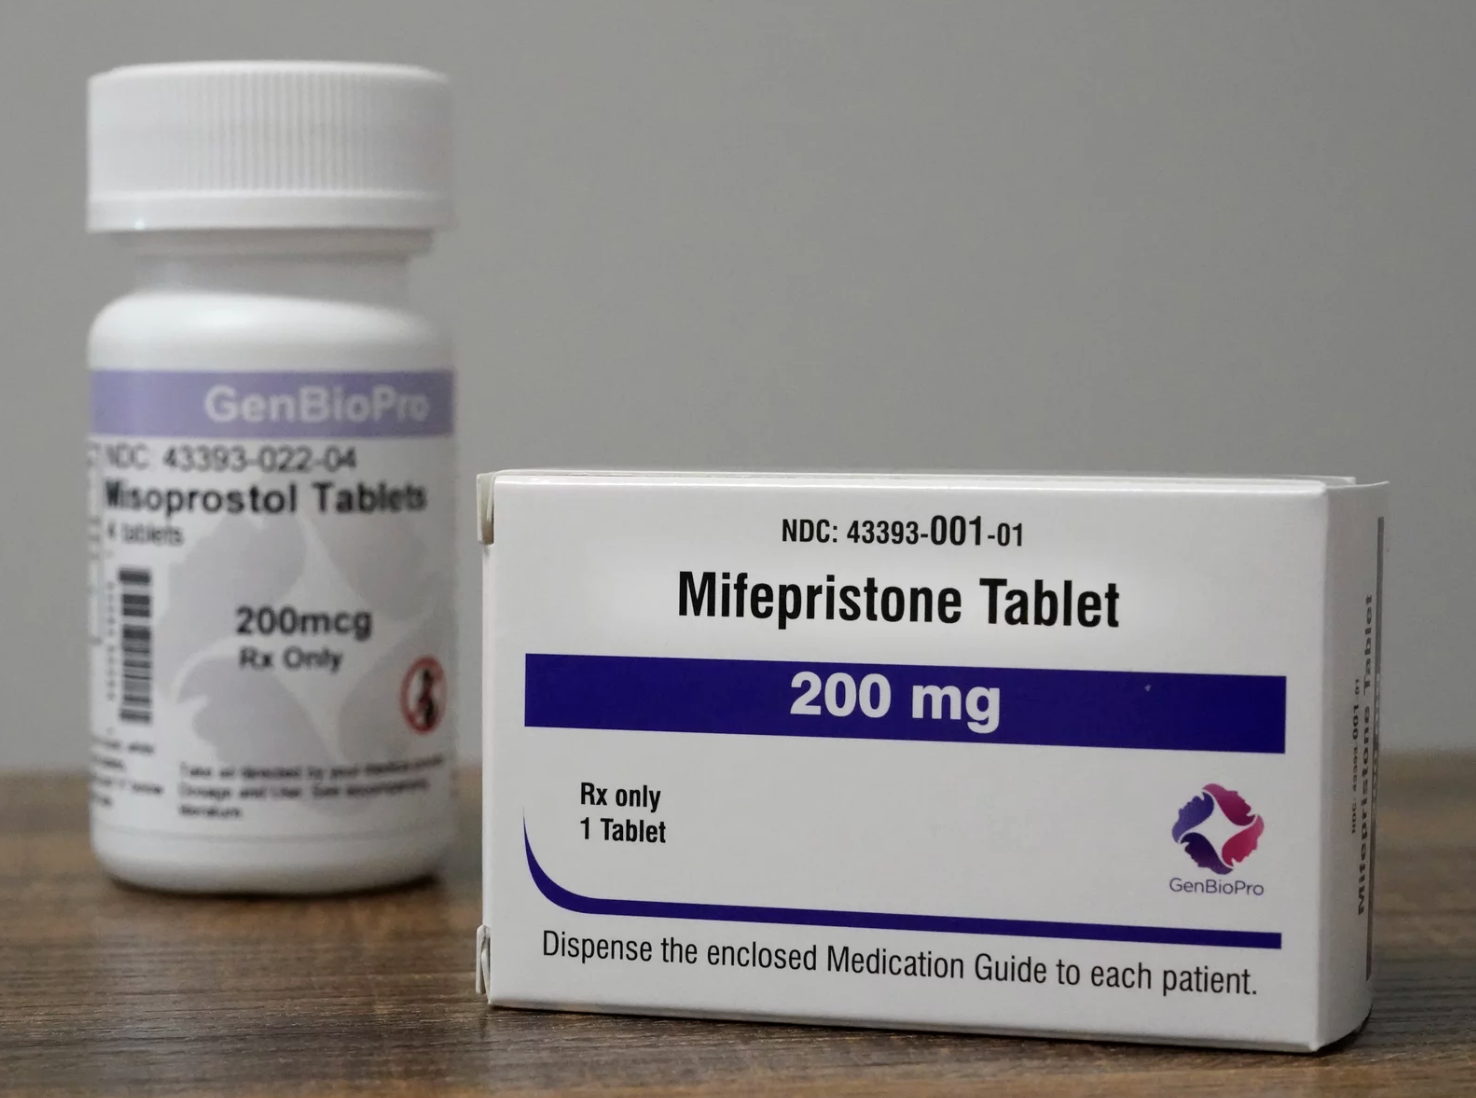 A bottle and box of Mifepristone